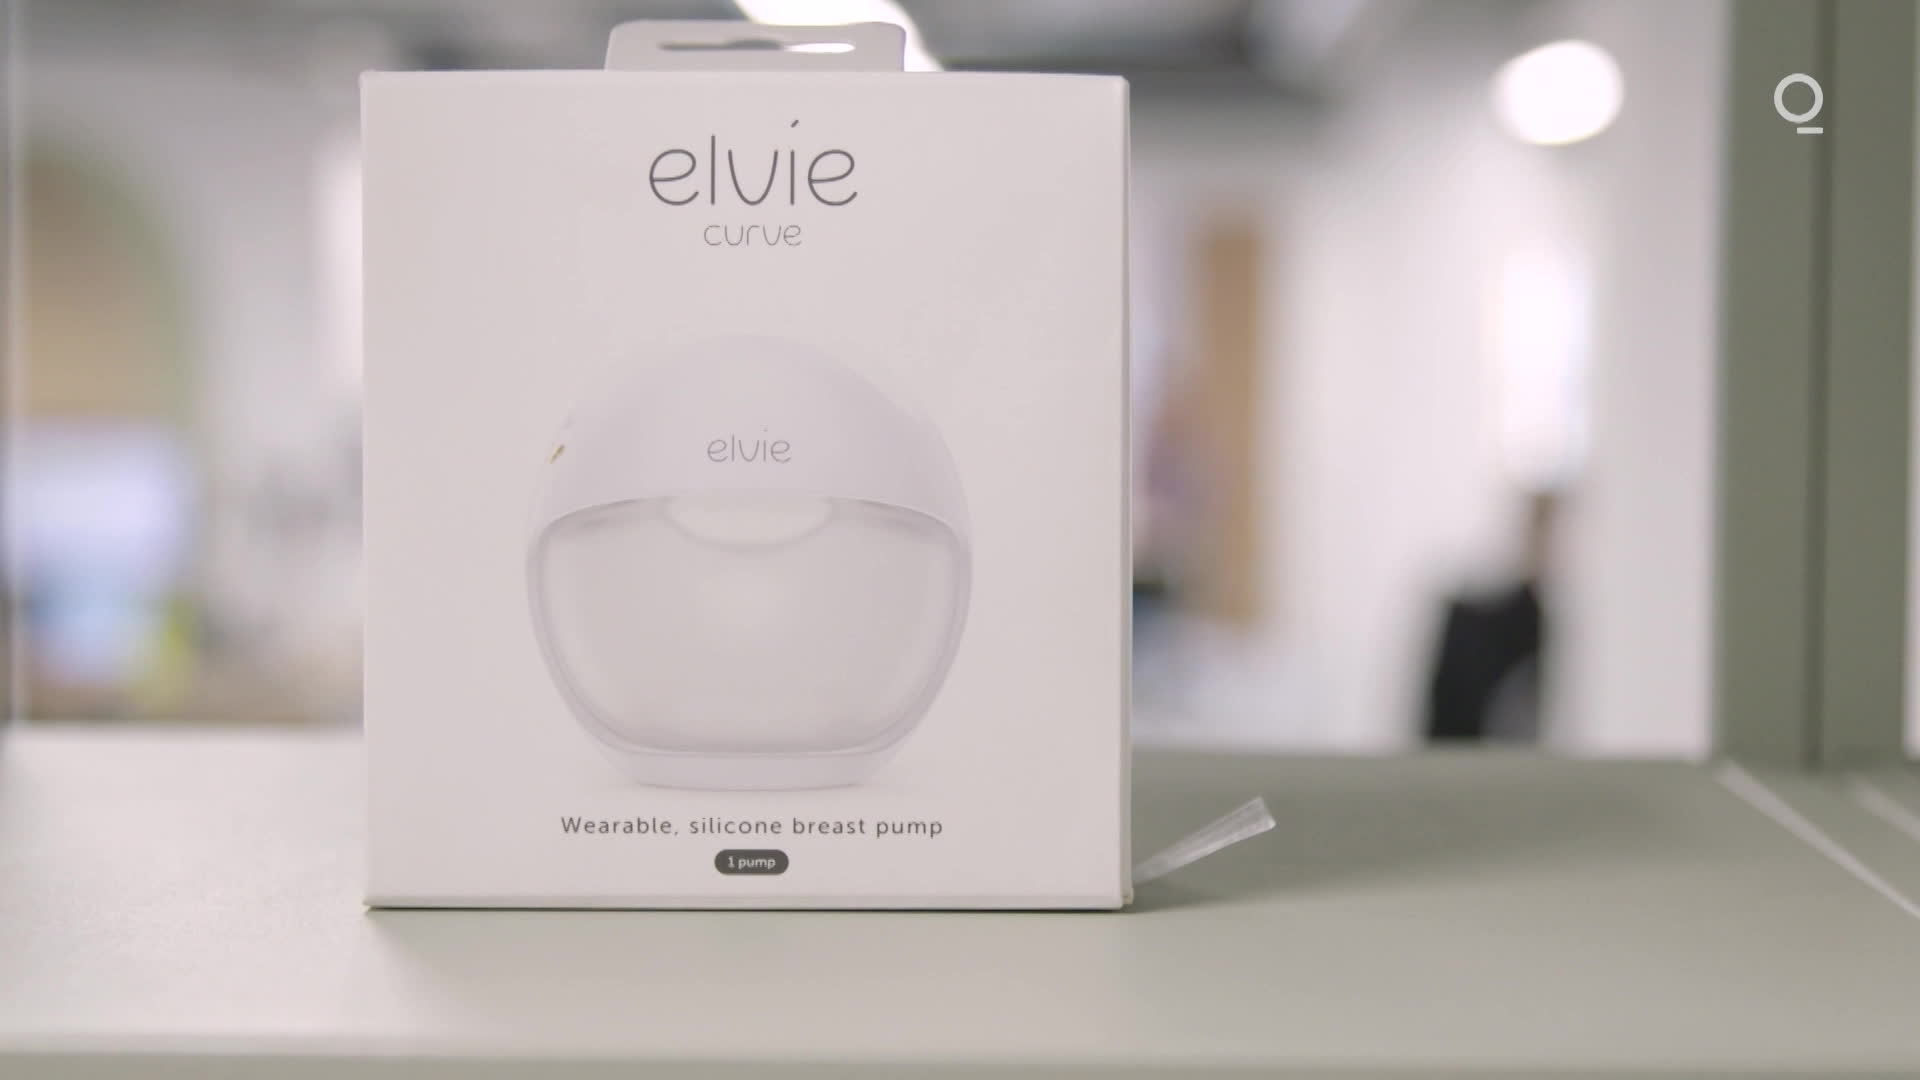 Watch Femtech Startup Elvie's New Take on the Breast Pump - Bloomberg